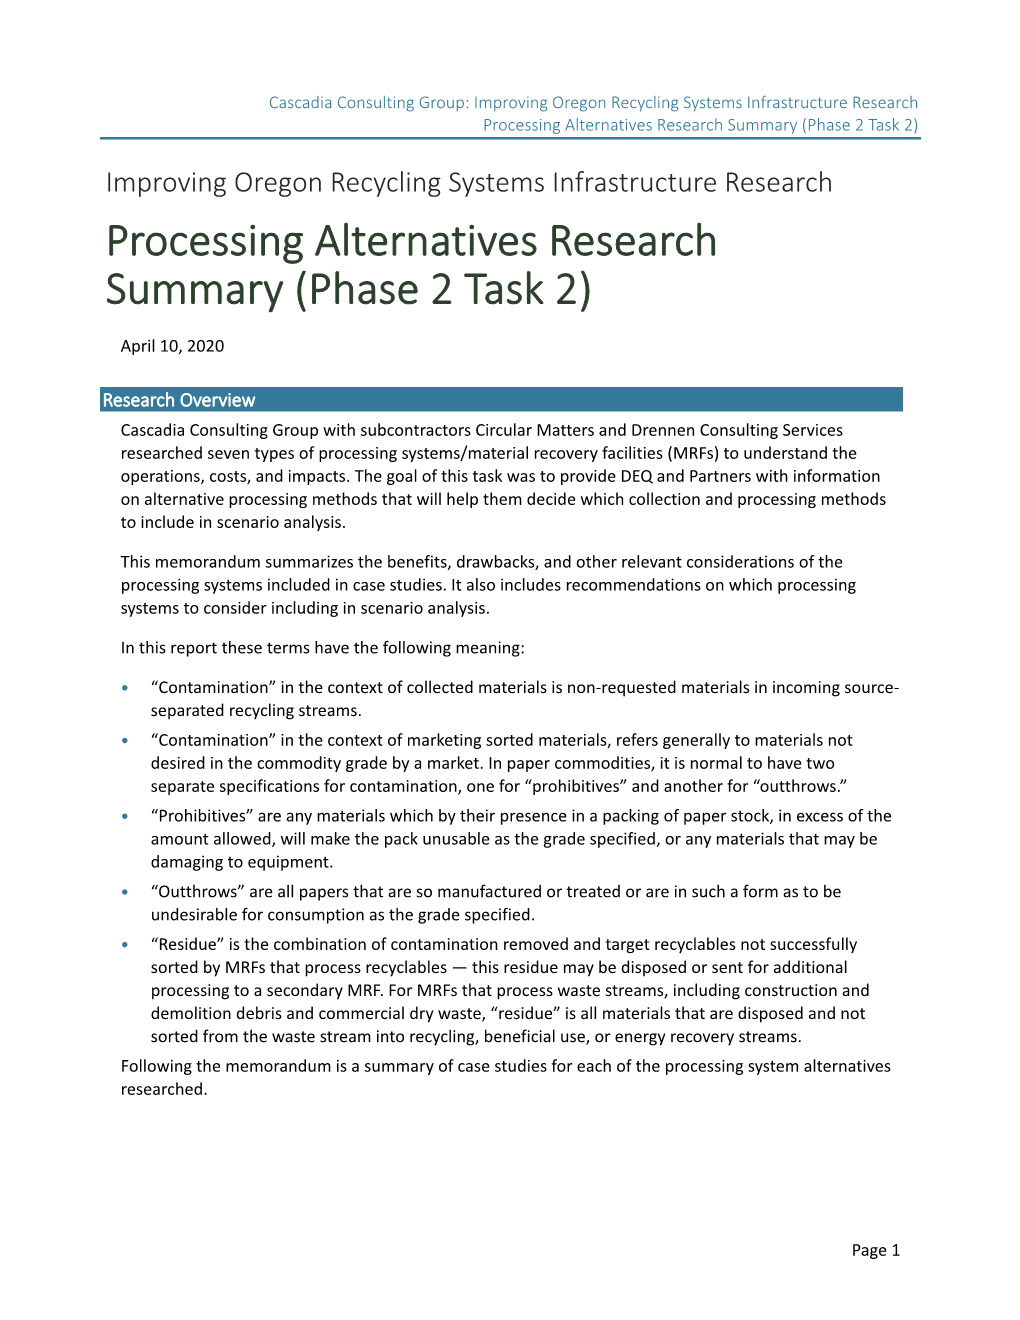 Processing Alternatives Research Summary (Phase 2 Task 2)